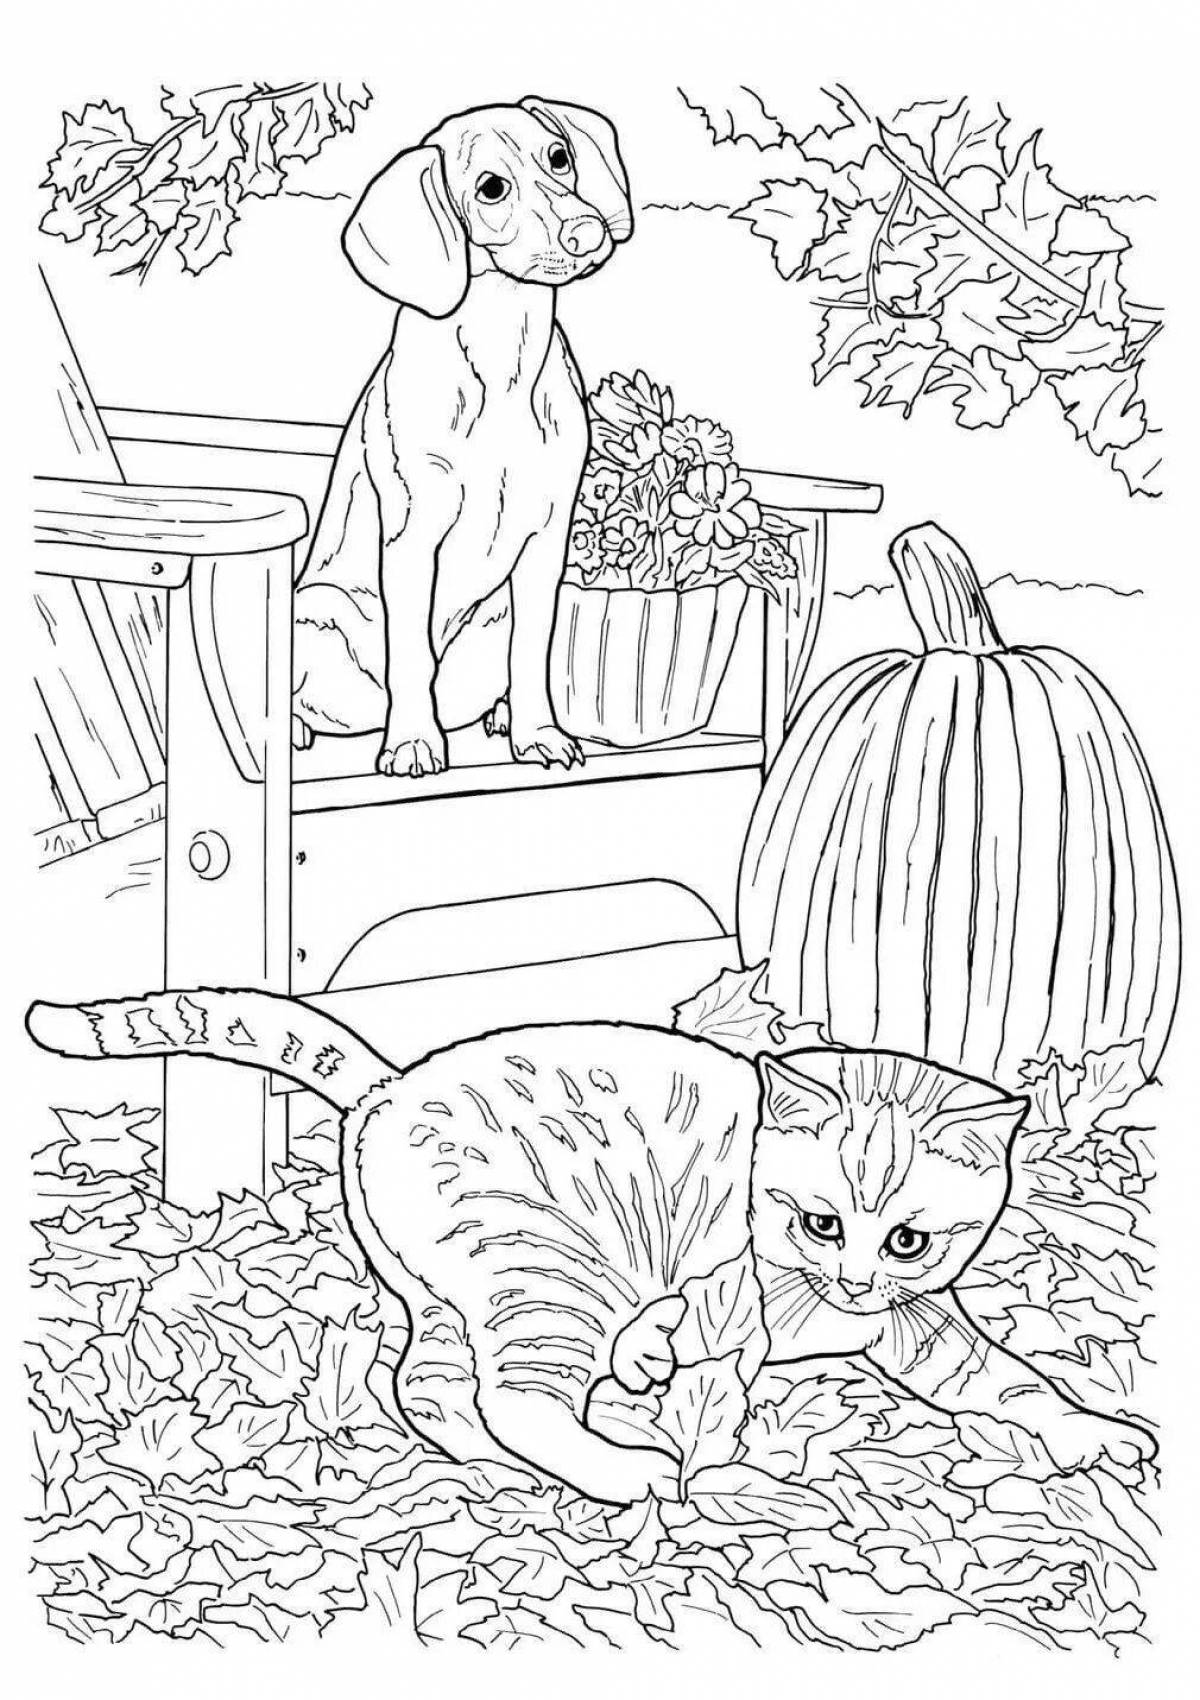 Curious cat and dog coloring page